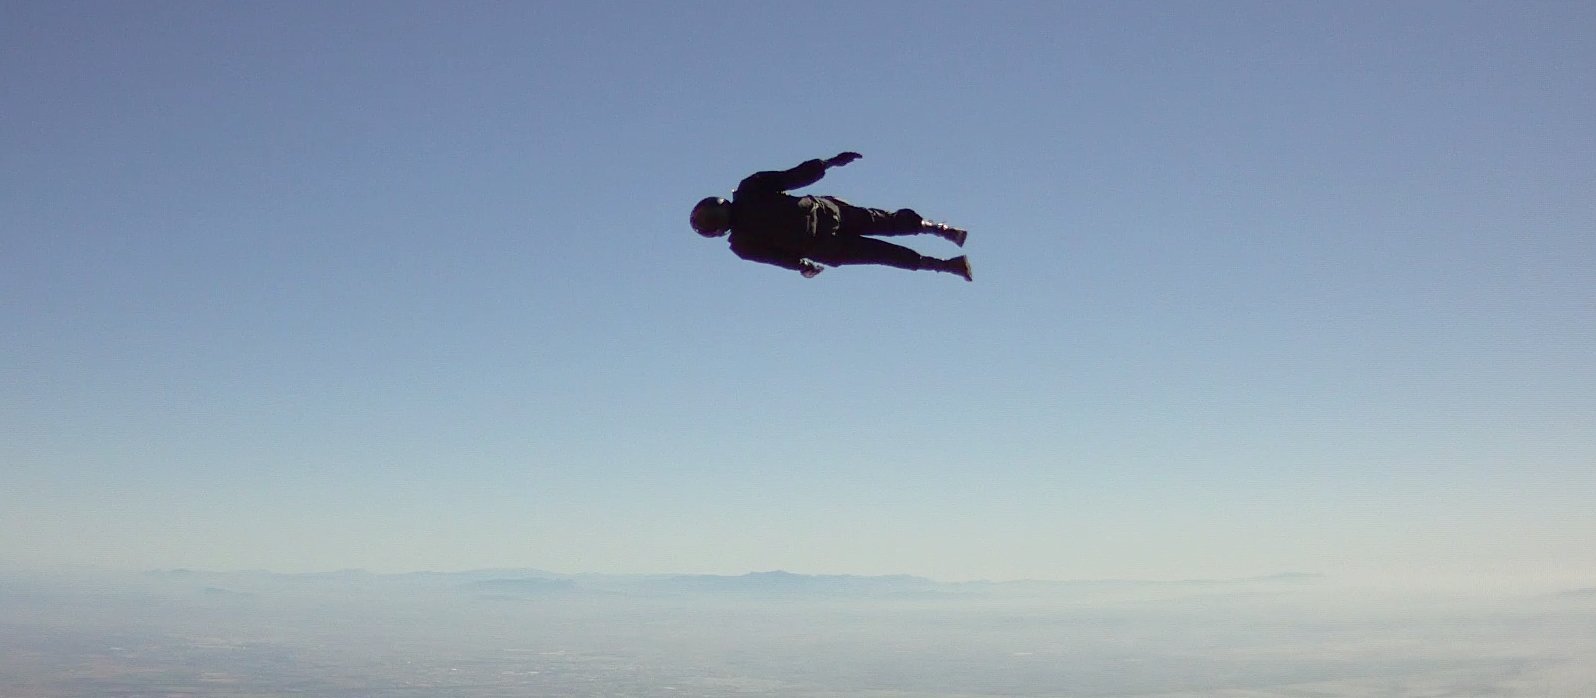 High altitude skydive over Sevilla for a Swedish commercial